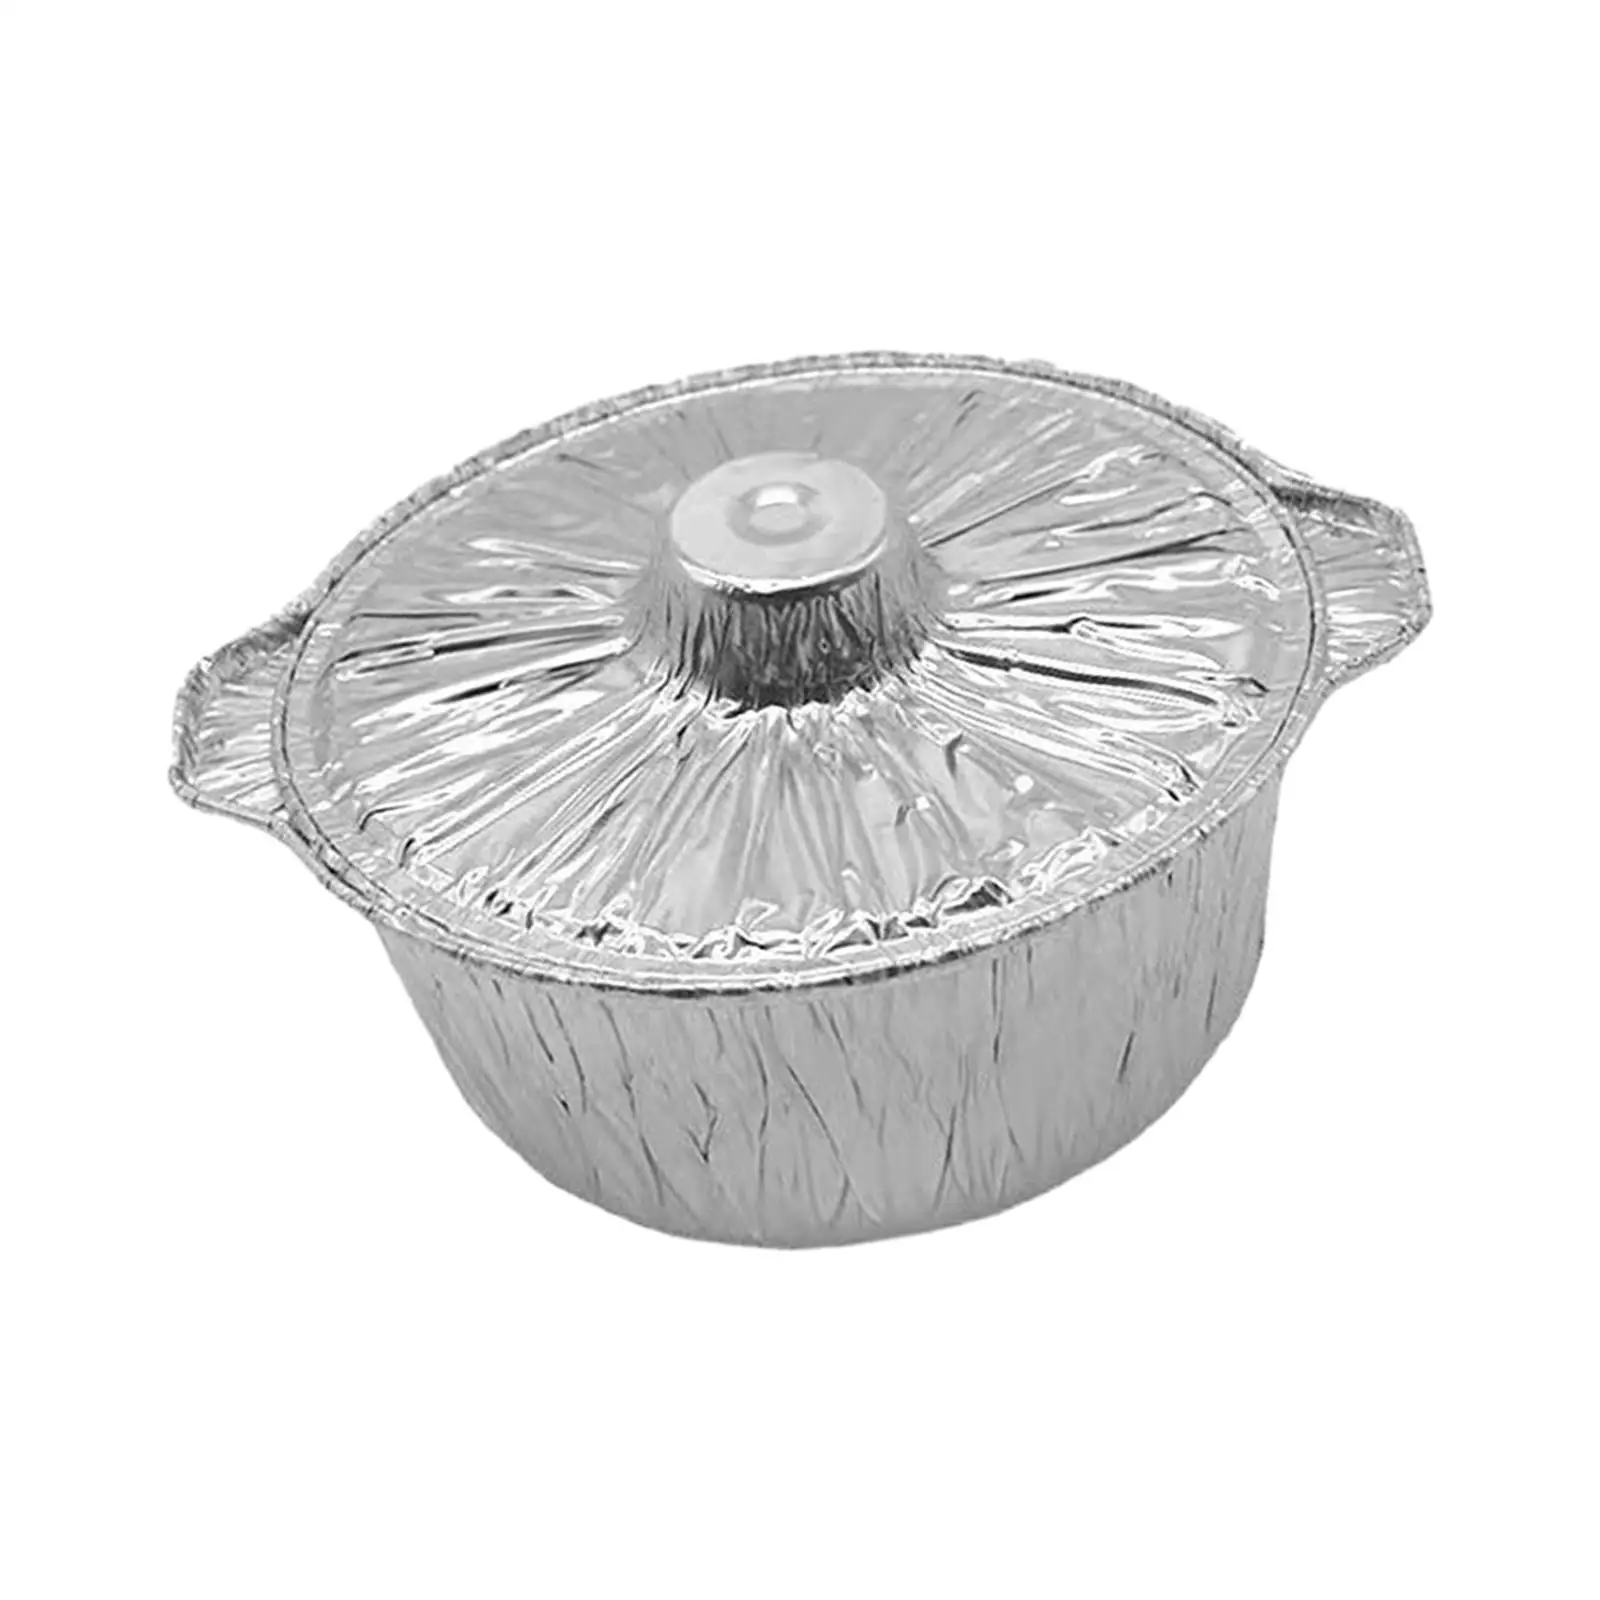 Foil Meat Pot with Lid Stockpot Pie Pan Hotpot Cake Pan Bakeware Cooking Hot Pot for Camping Home Restaurant Vacation Events